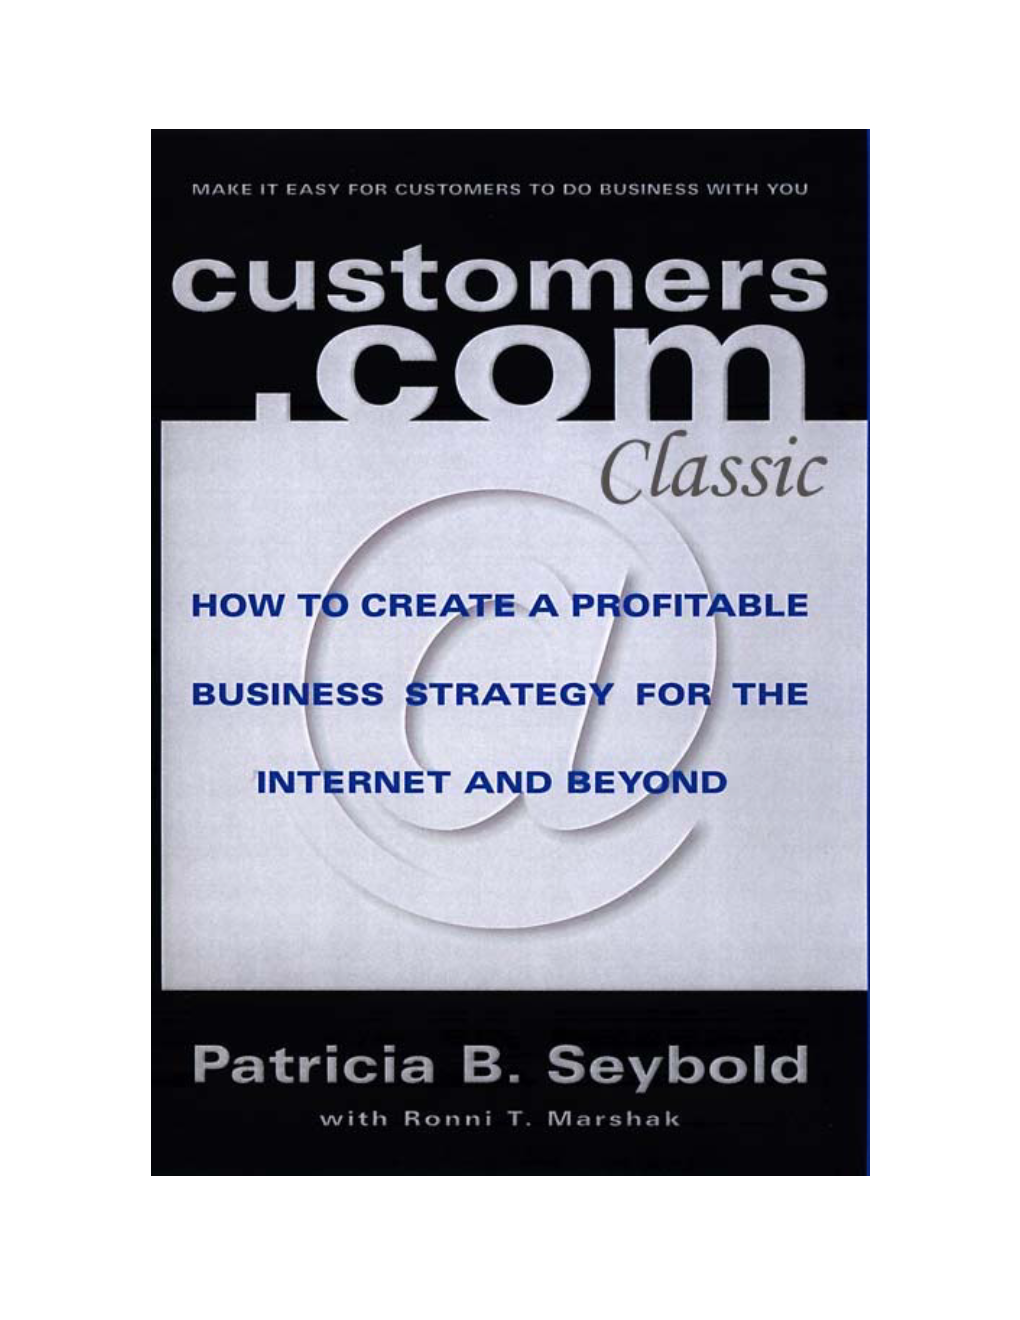 How to Create a Profitable Business Strategy for the Internet and Beyond